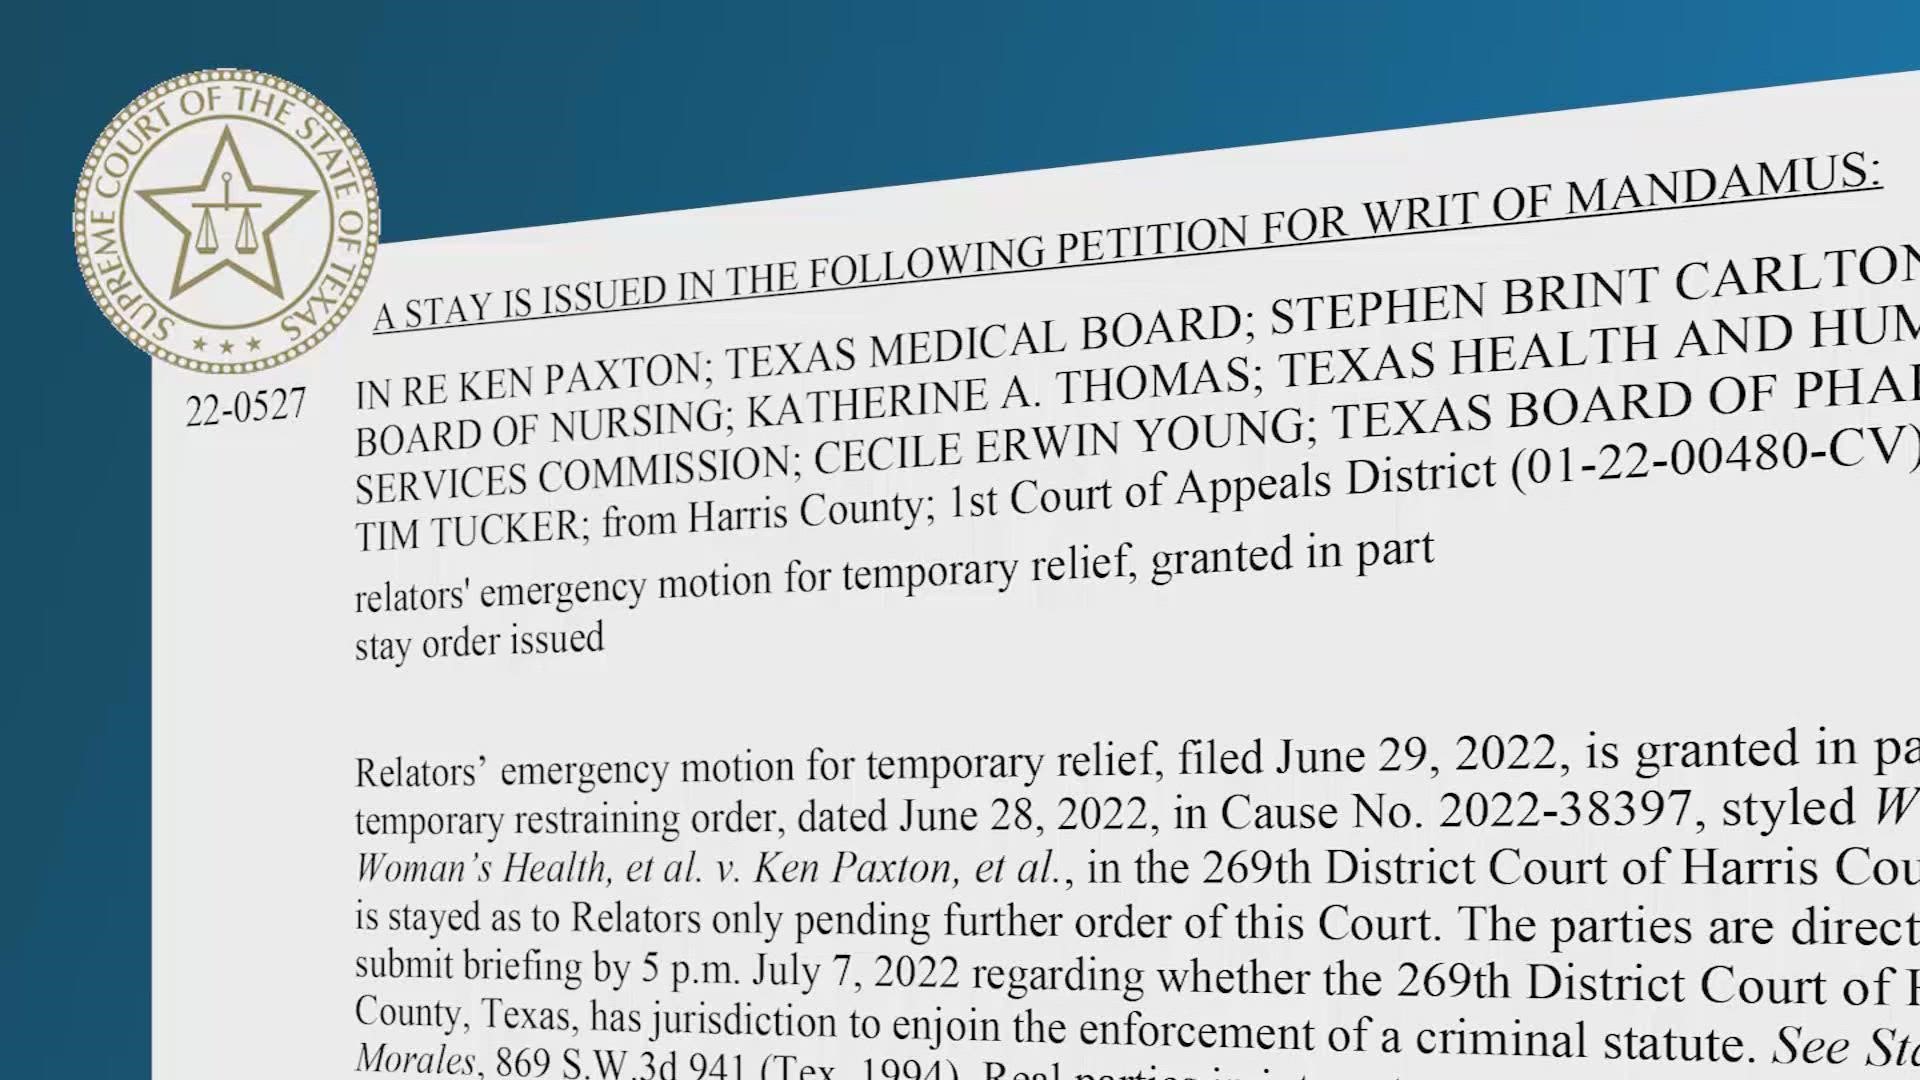 Late Friday night, the Texas Supreme Court blocked a lower court order that temporarily allowed clinics to continue performing abortions.